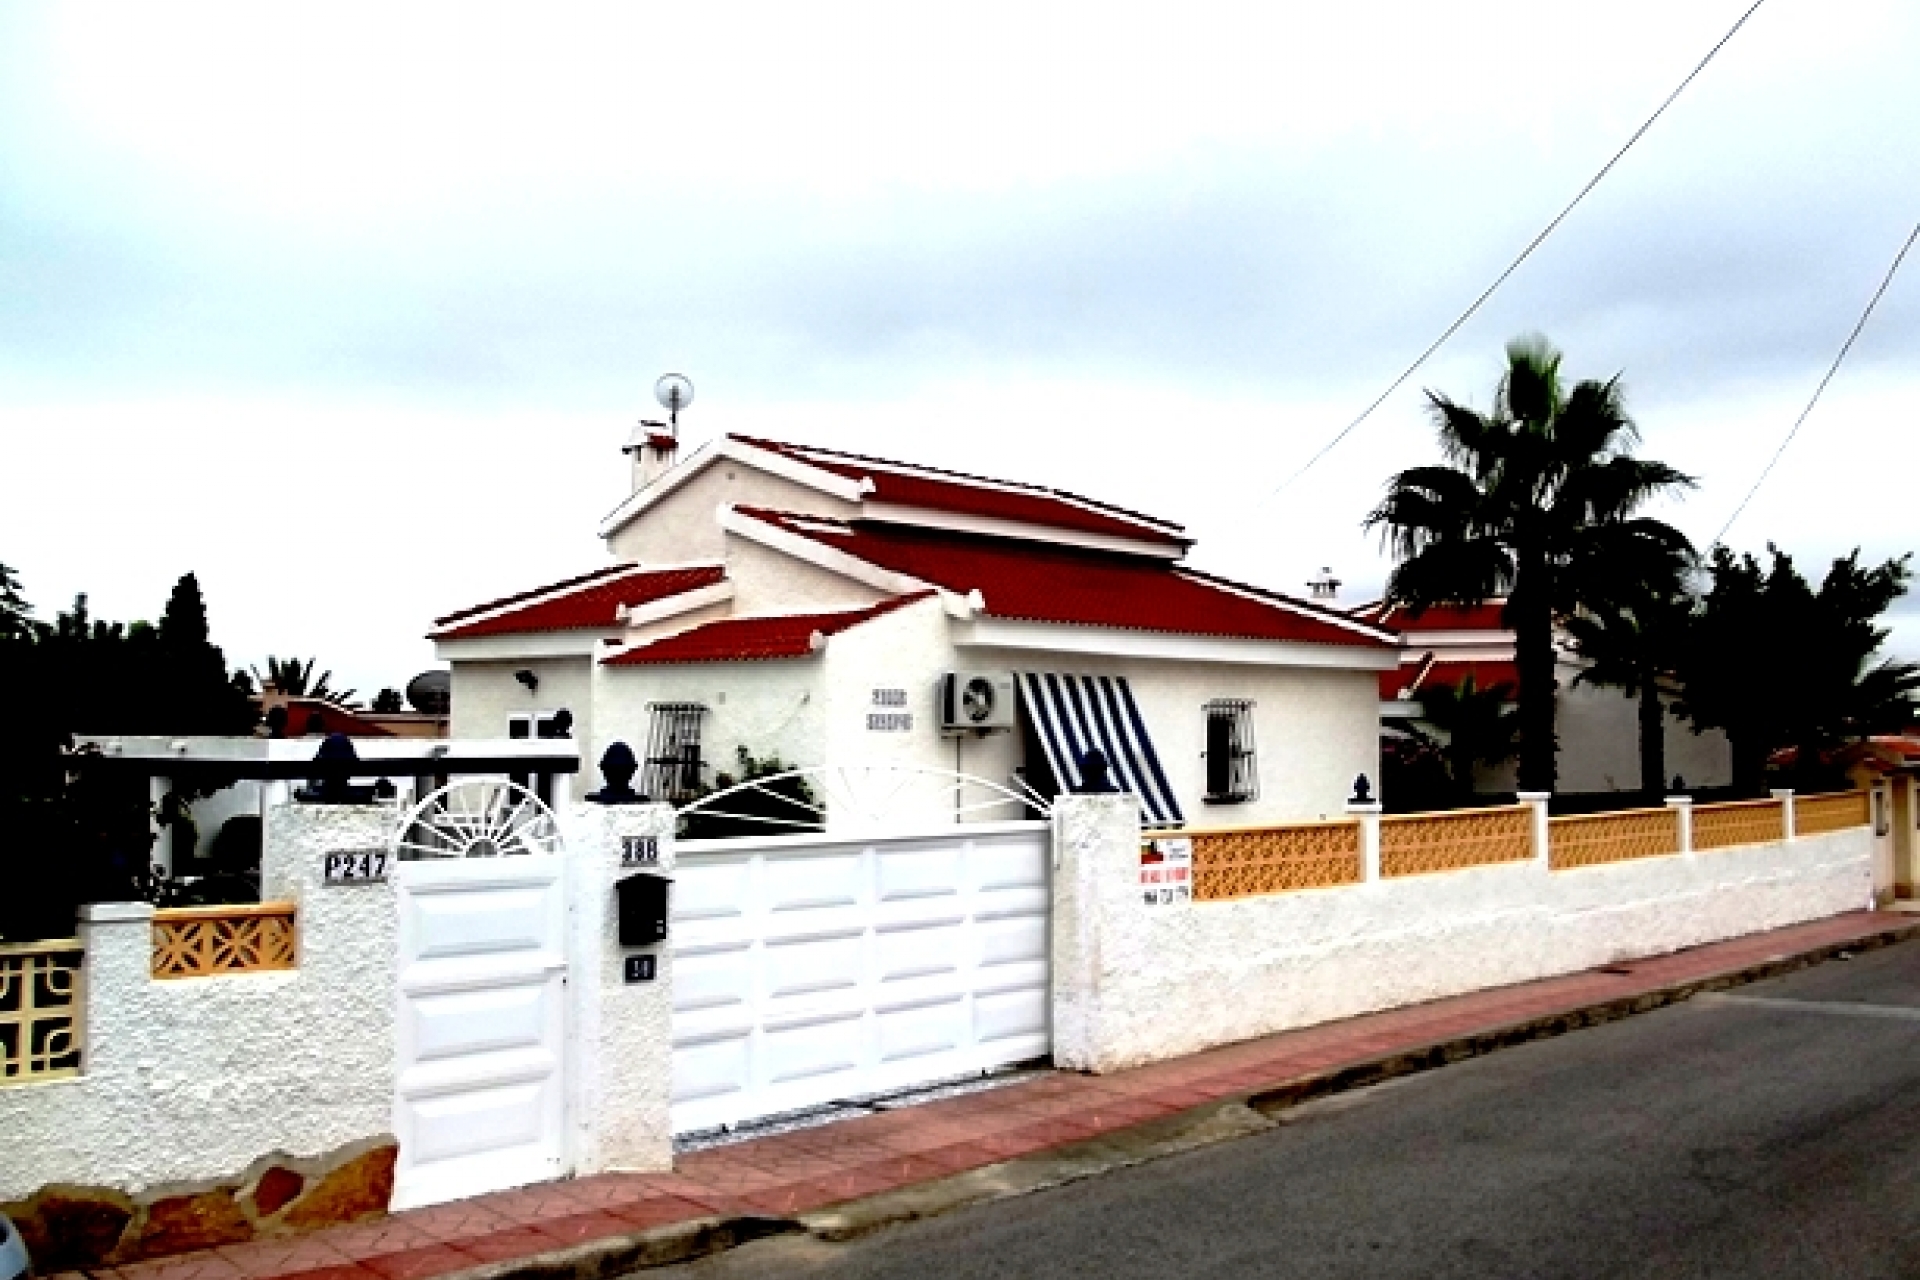 Property for sale in Ciudad Quesada, cheap, bargain property on Spains Orihuela Costa for sale.